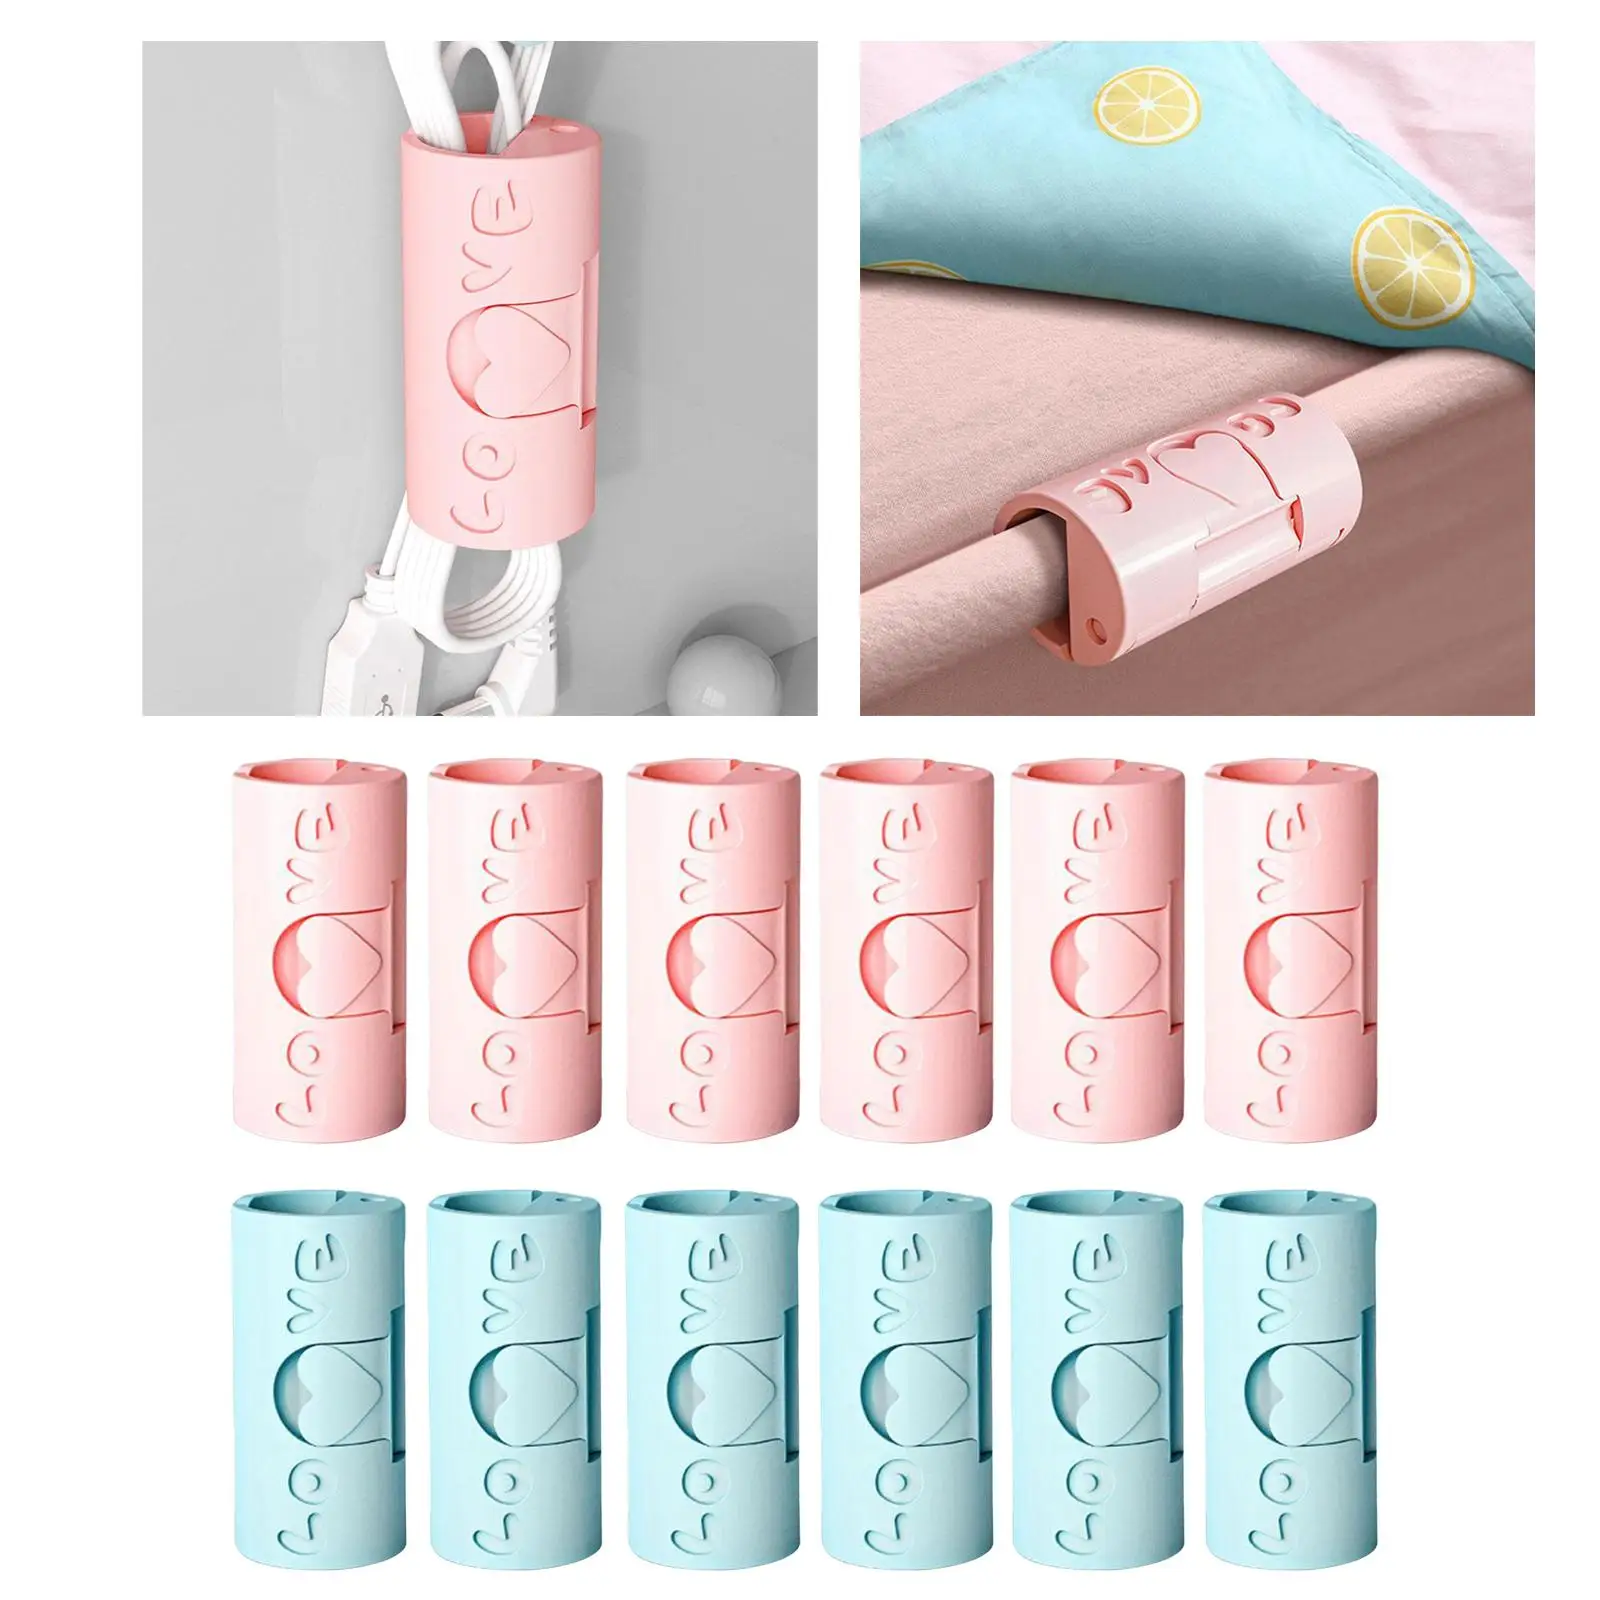 6 Pieces Multipurpose Bed Sheet Clips Needleless Organizer Clamp Storage Clip for Fastening Mattress Covers Comforter Towels